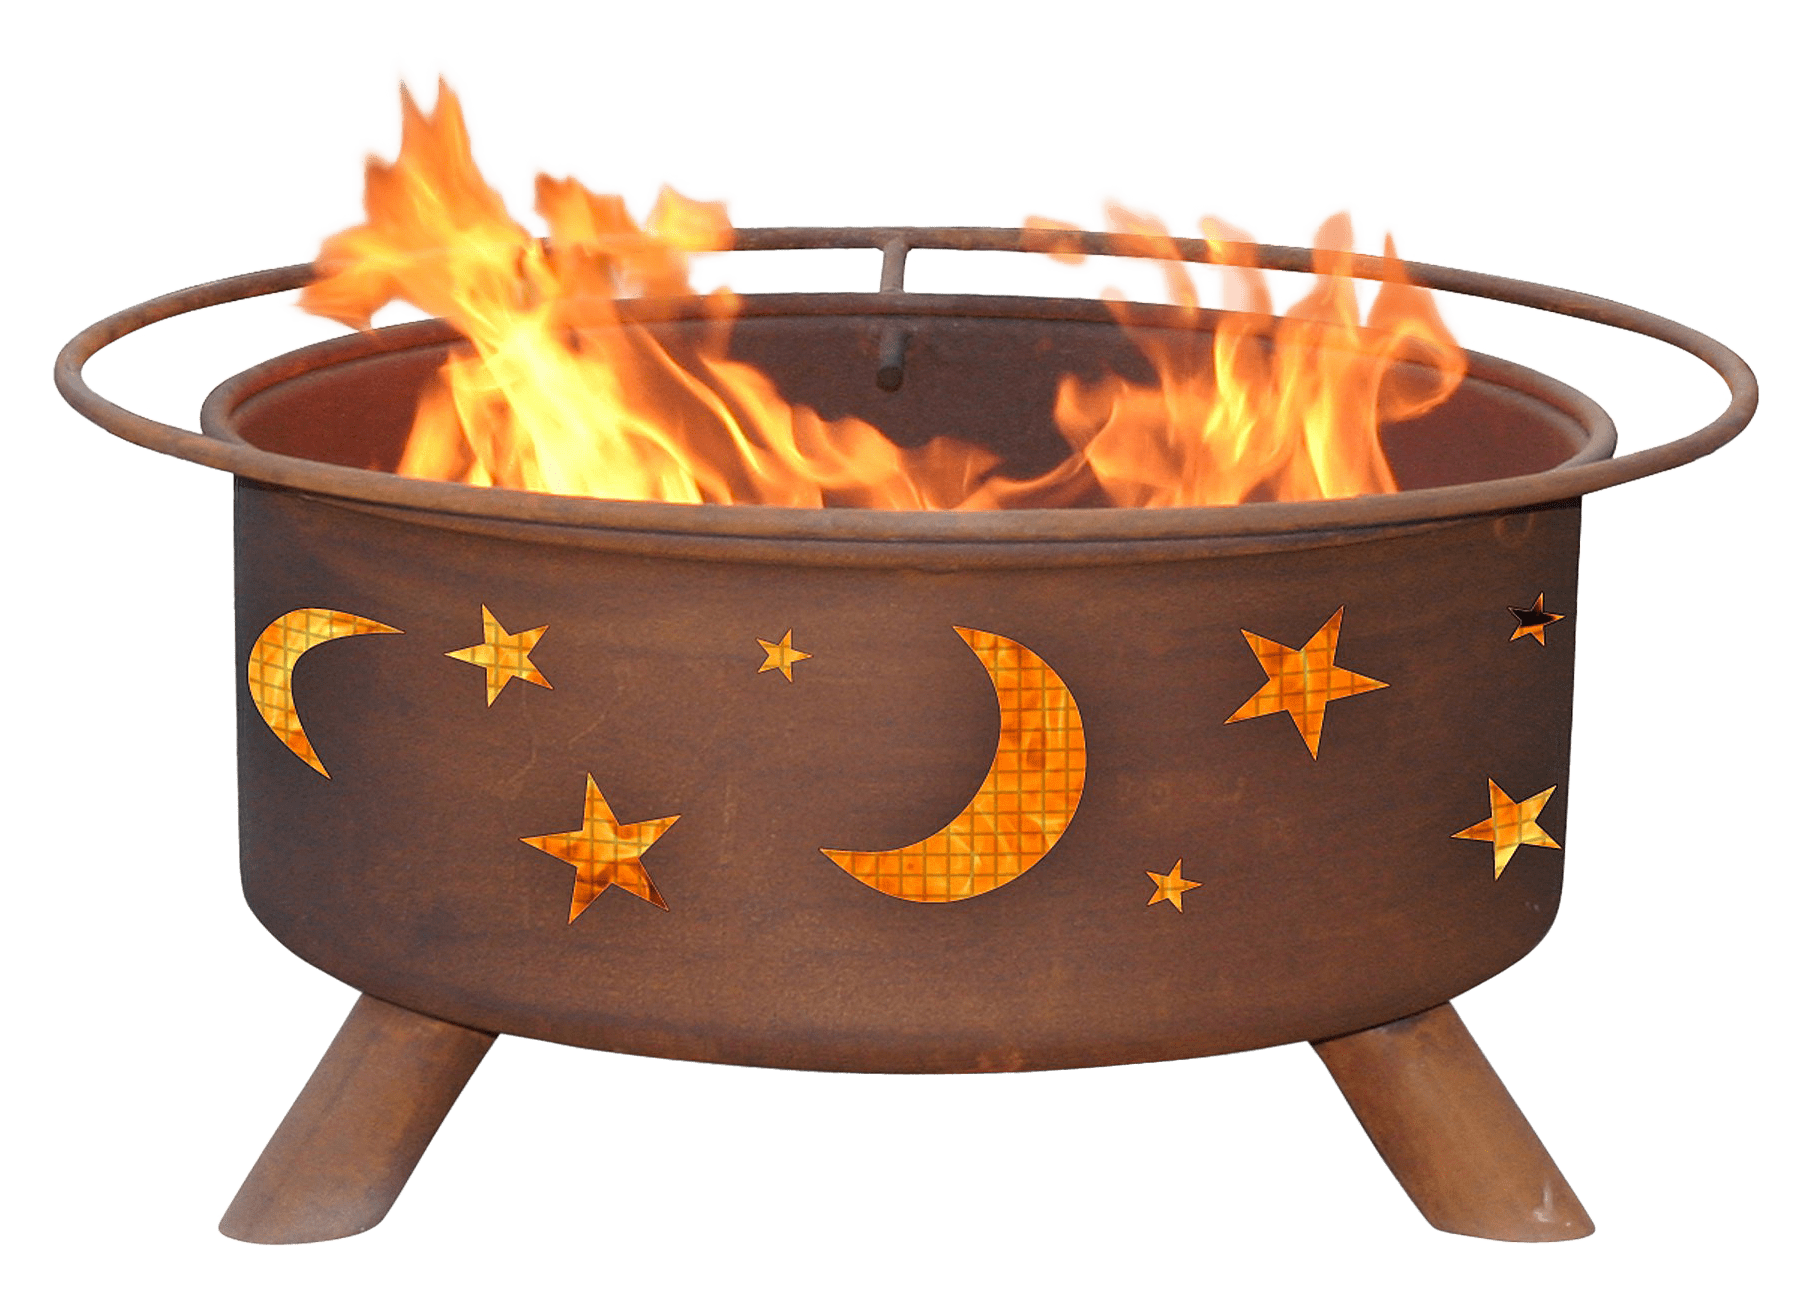 Patina Evening Sky Fire Pit - father's day gifts for grandfathers